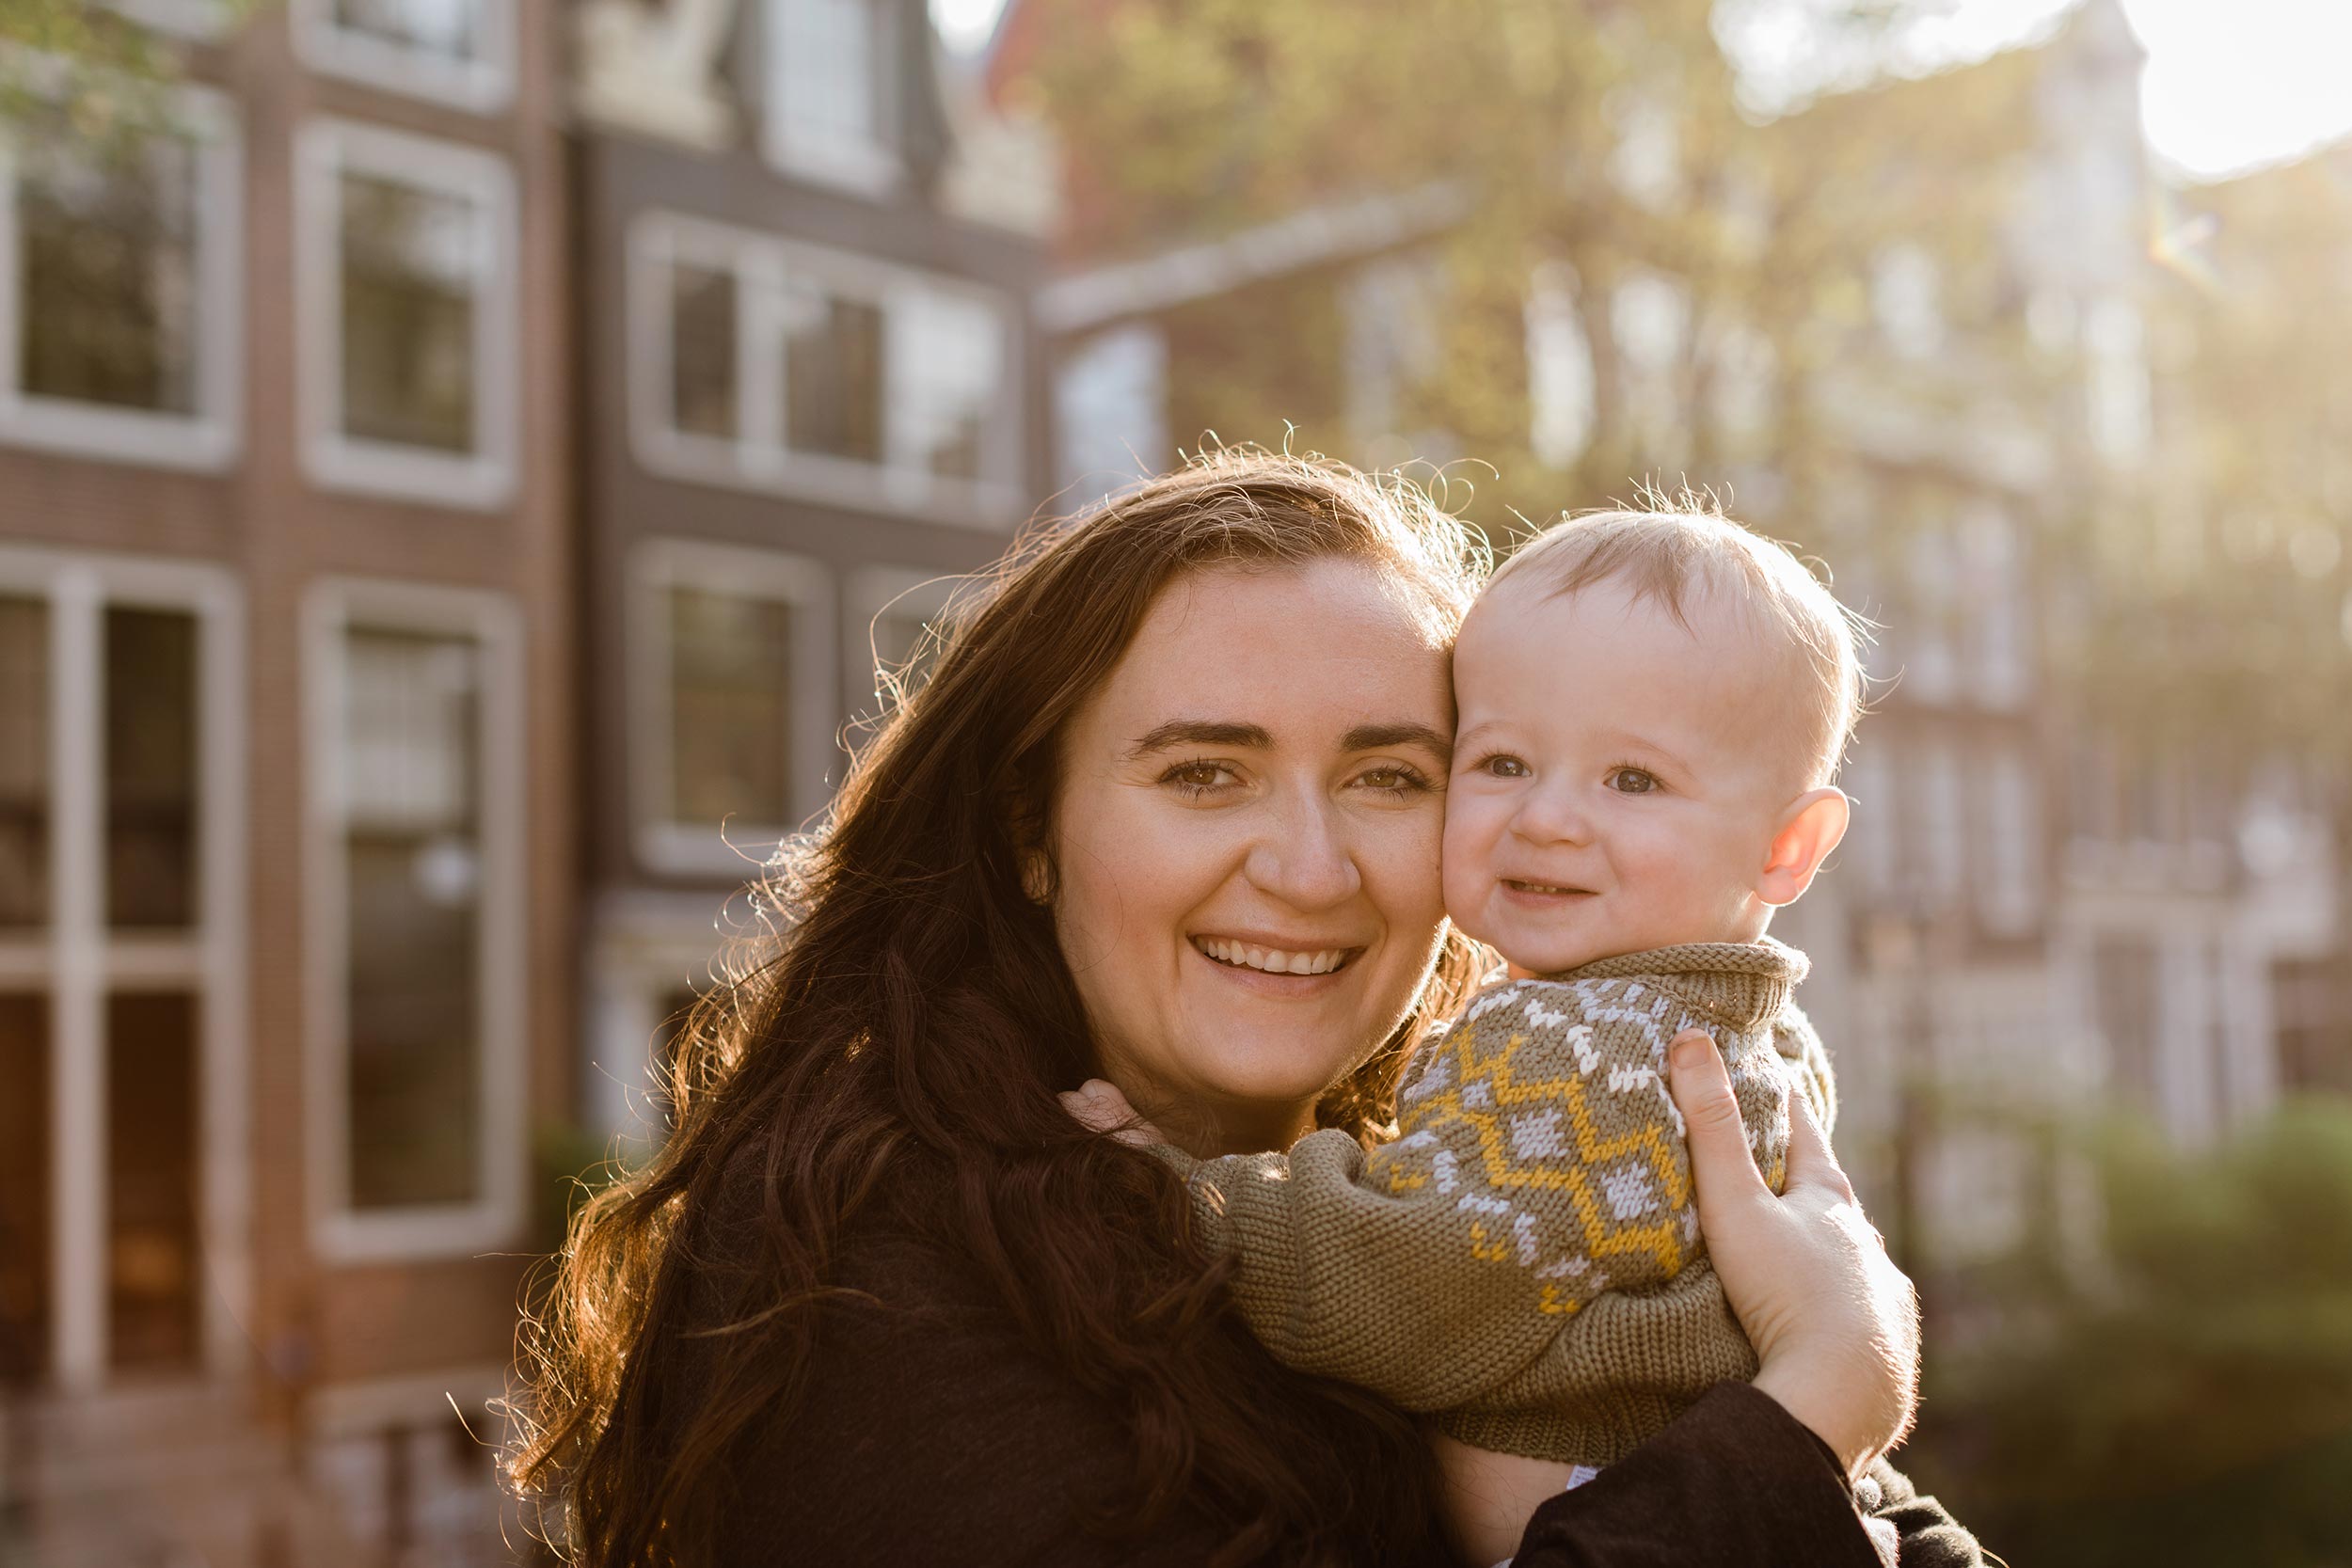 alt="Amsterdam canal view mother and baby portrait photography"